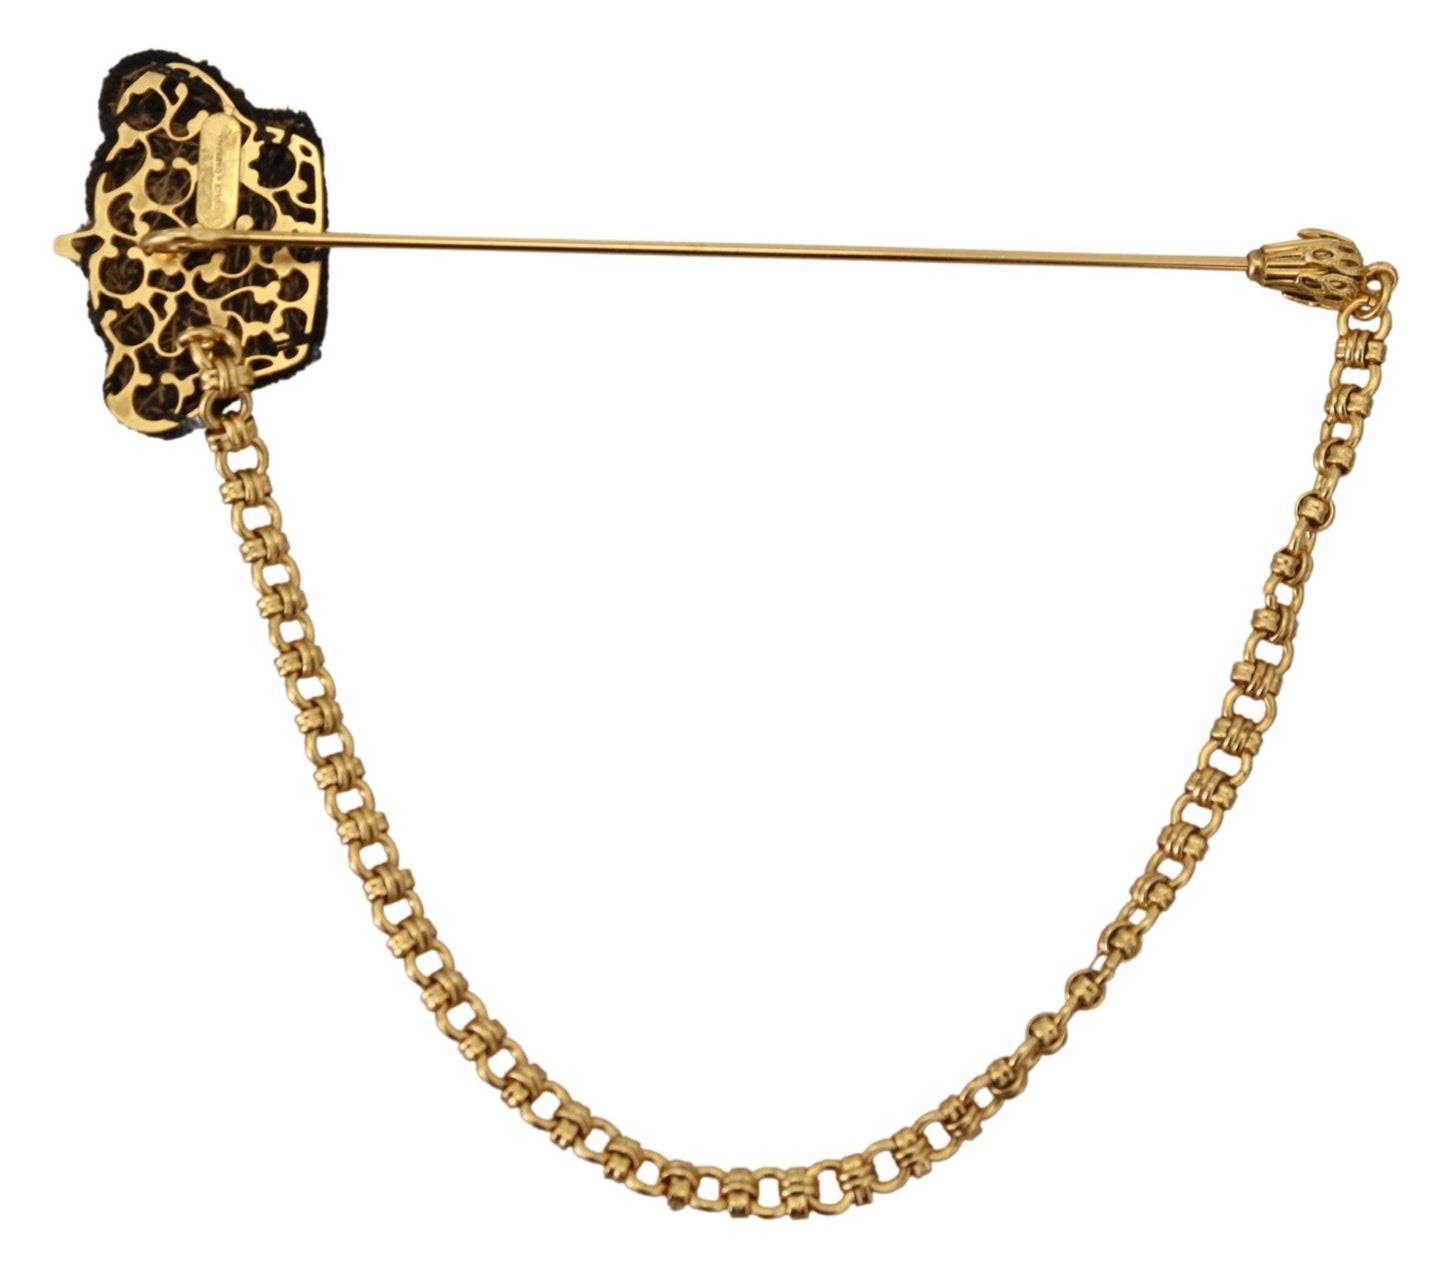 Elegant Gold Tone Glass-Accented Brooch Pin